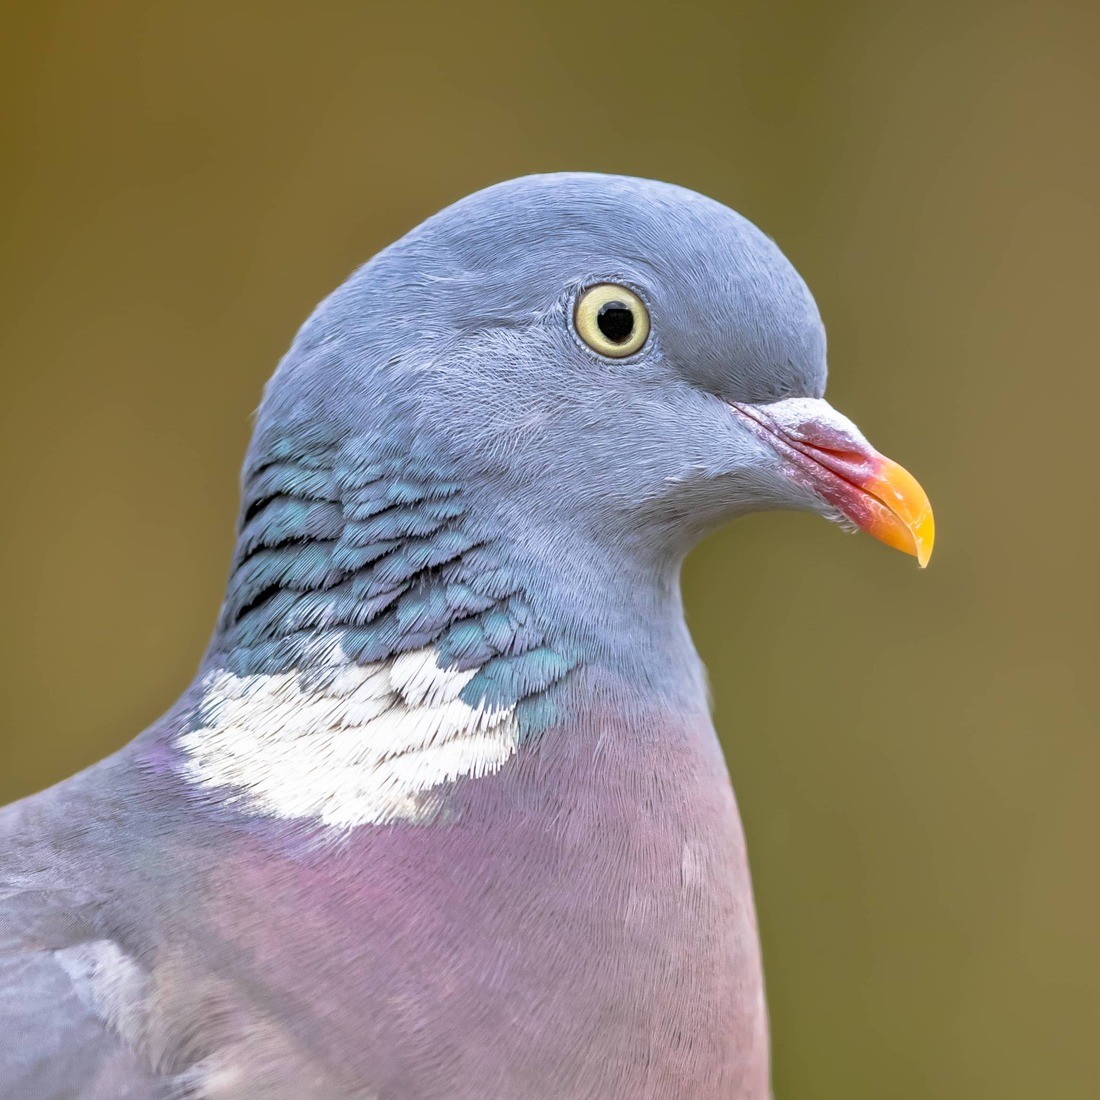 Picture related to Solar Pigeon Netting https://images.vc/image/4ld/headshot-portrait-of-wood-pigeon-2021-09-02-20-19-20-utc.jpg